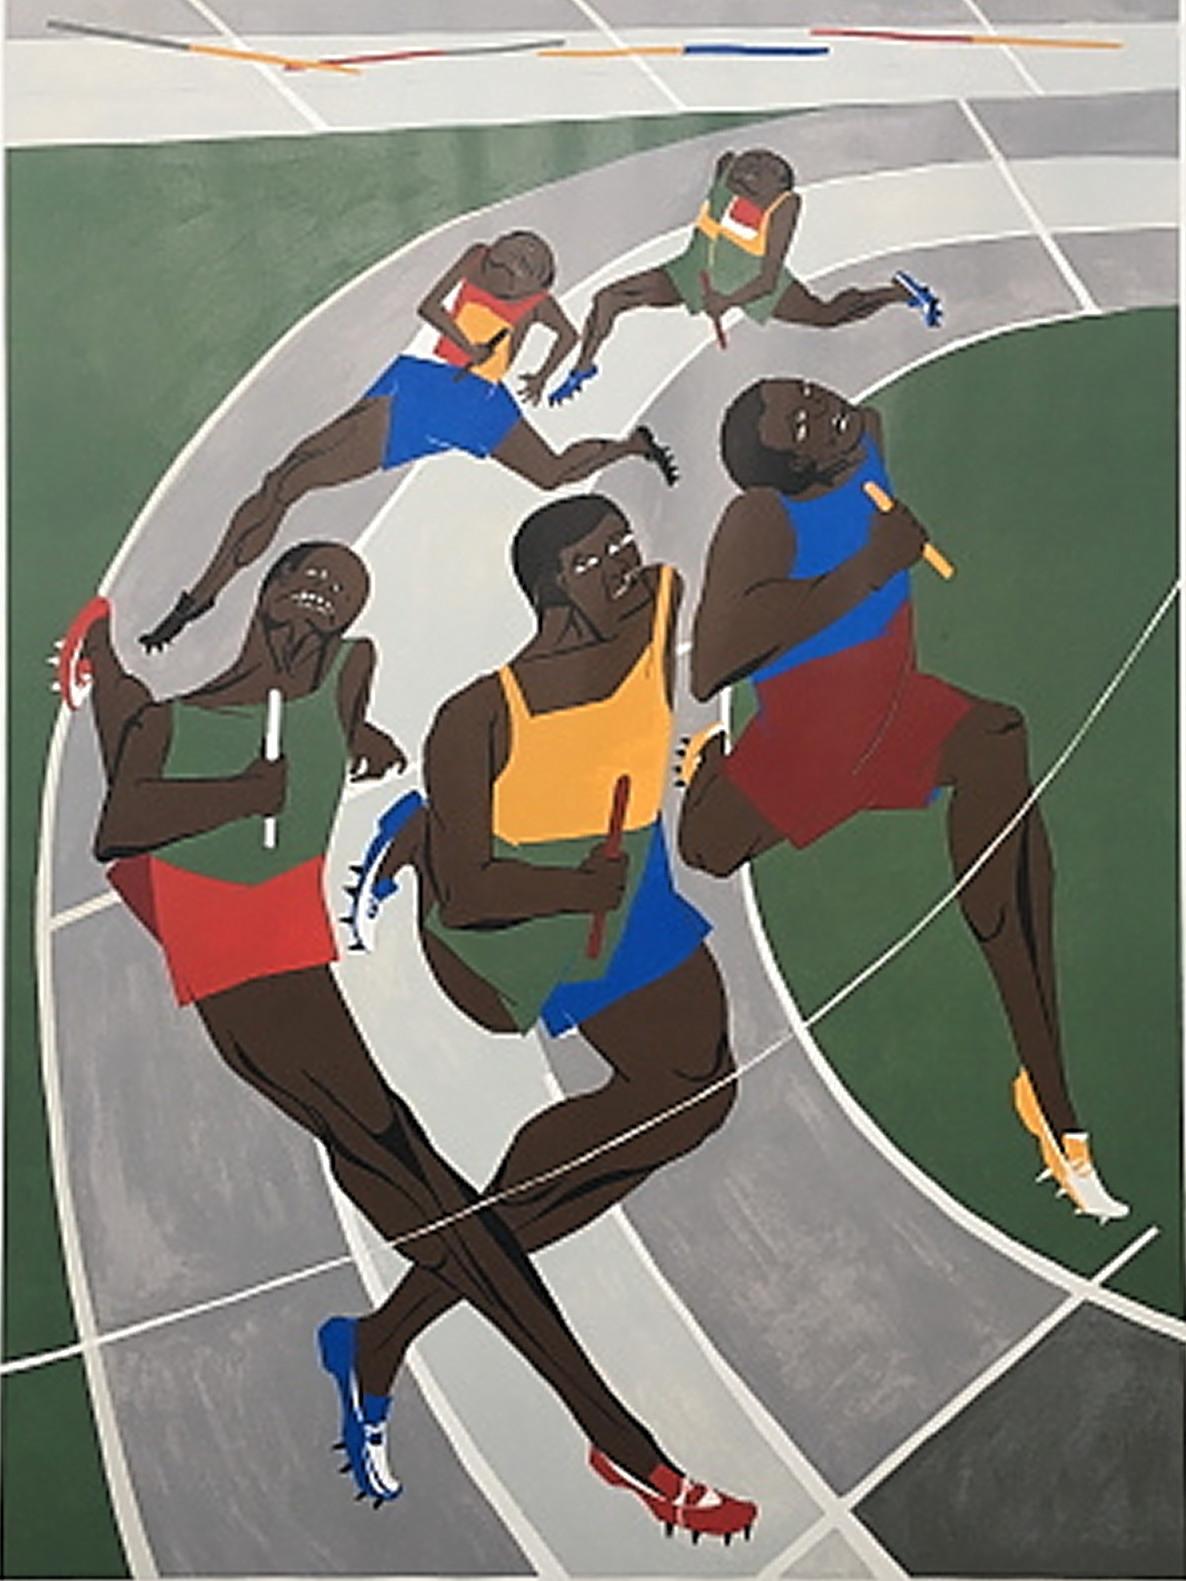 Rare Olympic Games Munich 1972 Limited Edition 'Poster entitled 'Five Black Athletes in a Relay Race' signed by Jacob Lawrence

Dimension:

Sheet Size: Length 109.5 × 69.5 cm

Image Size: Length: 87 × 64 cm

Edition Size: 200

Edition